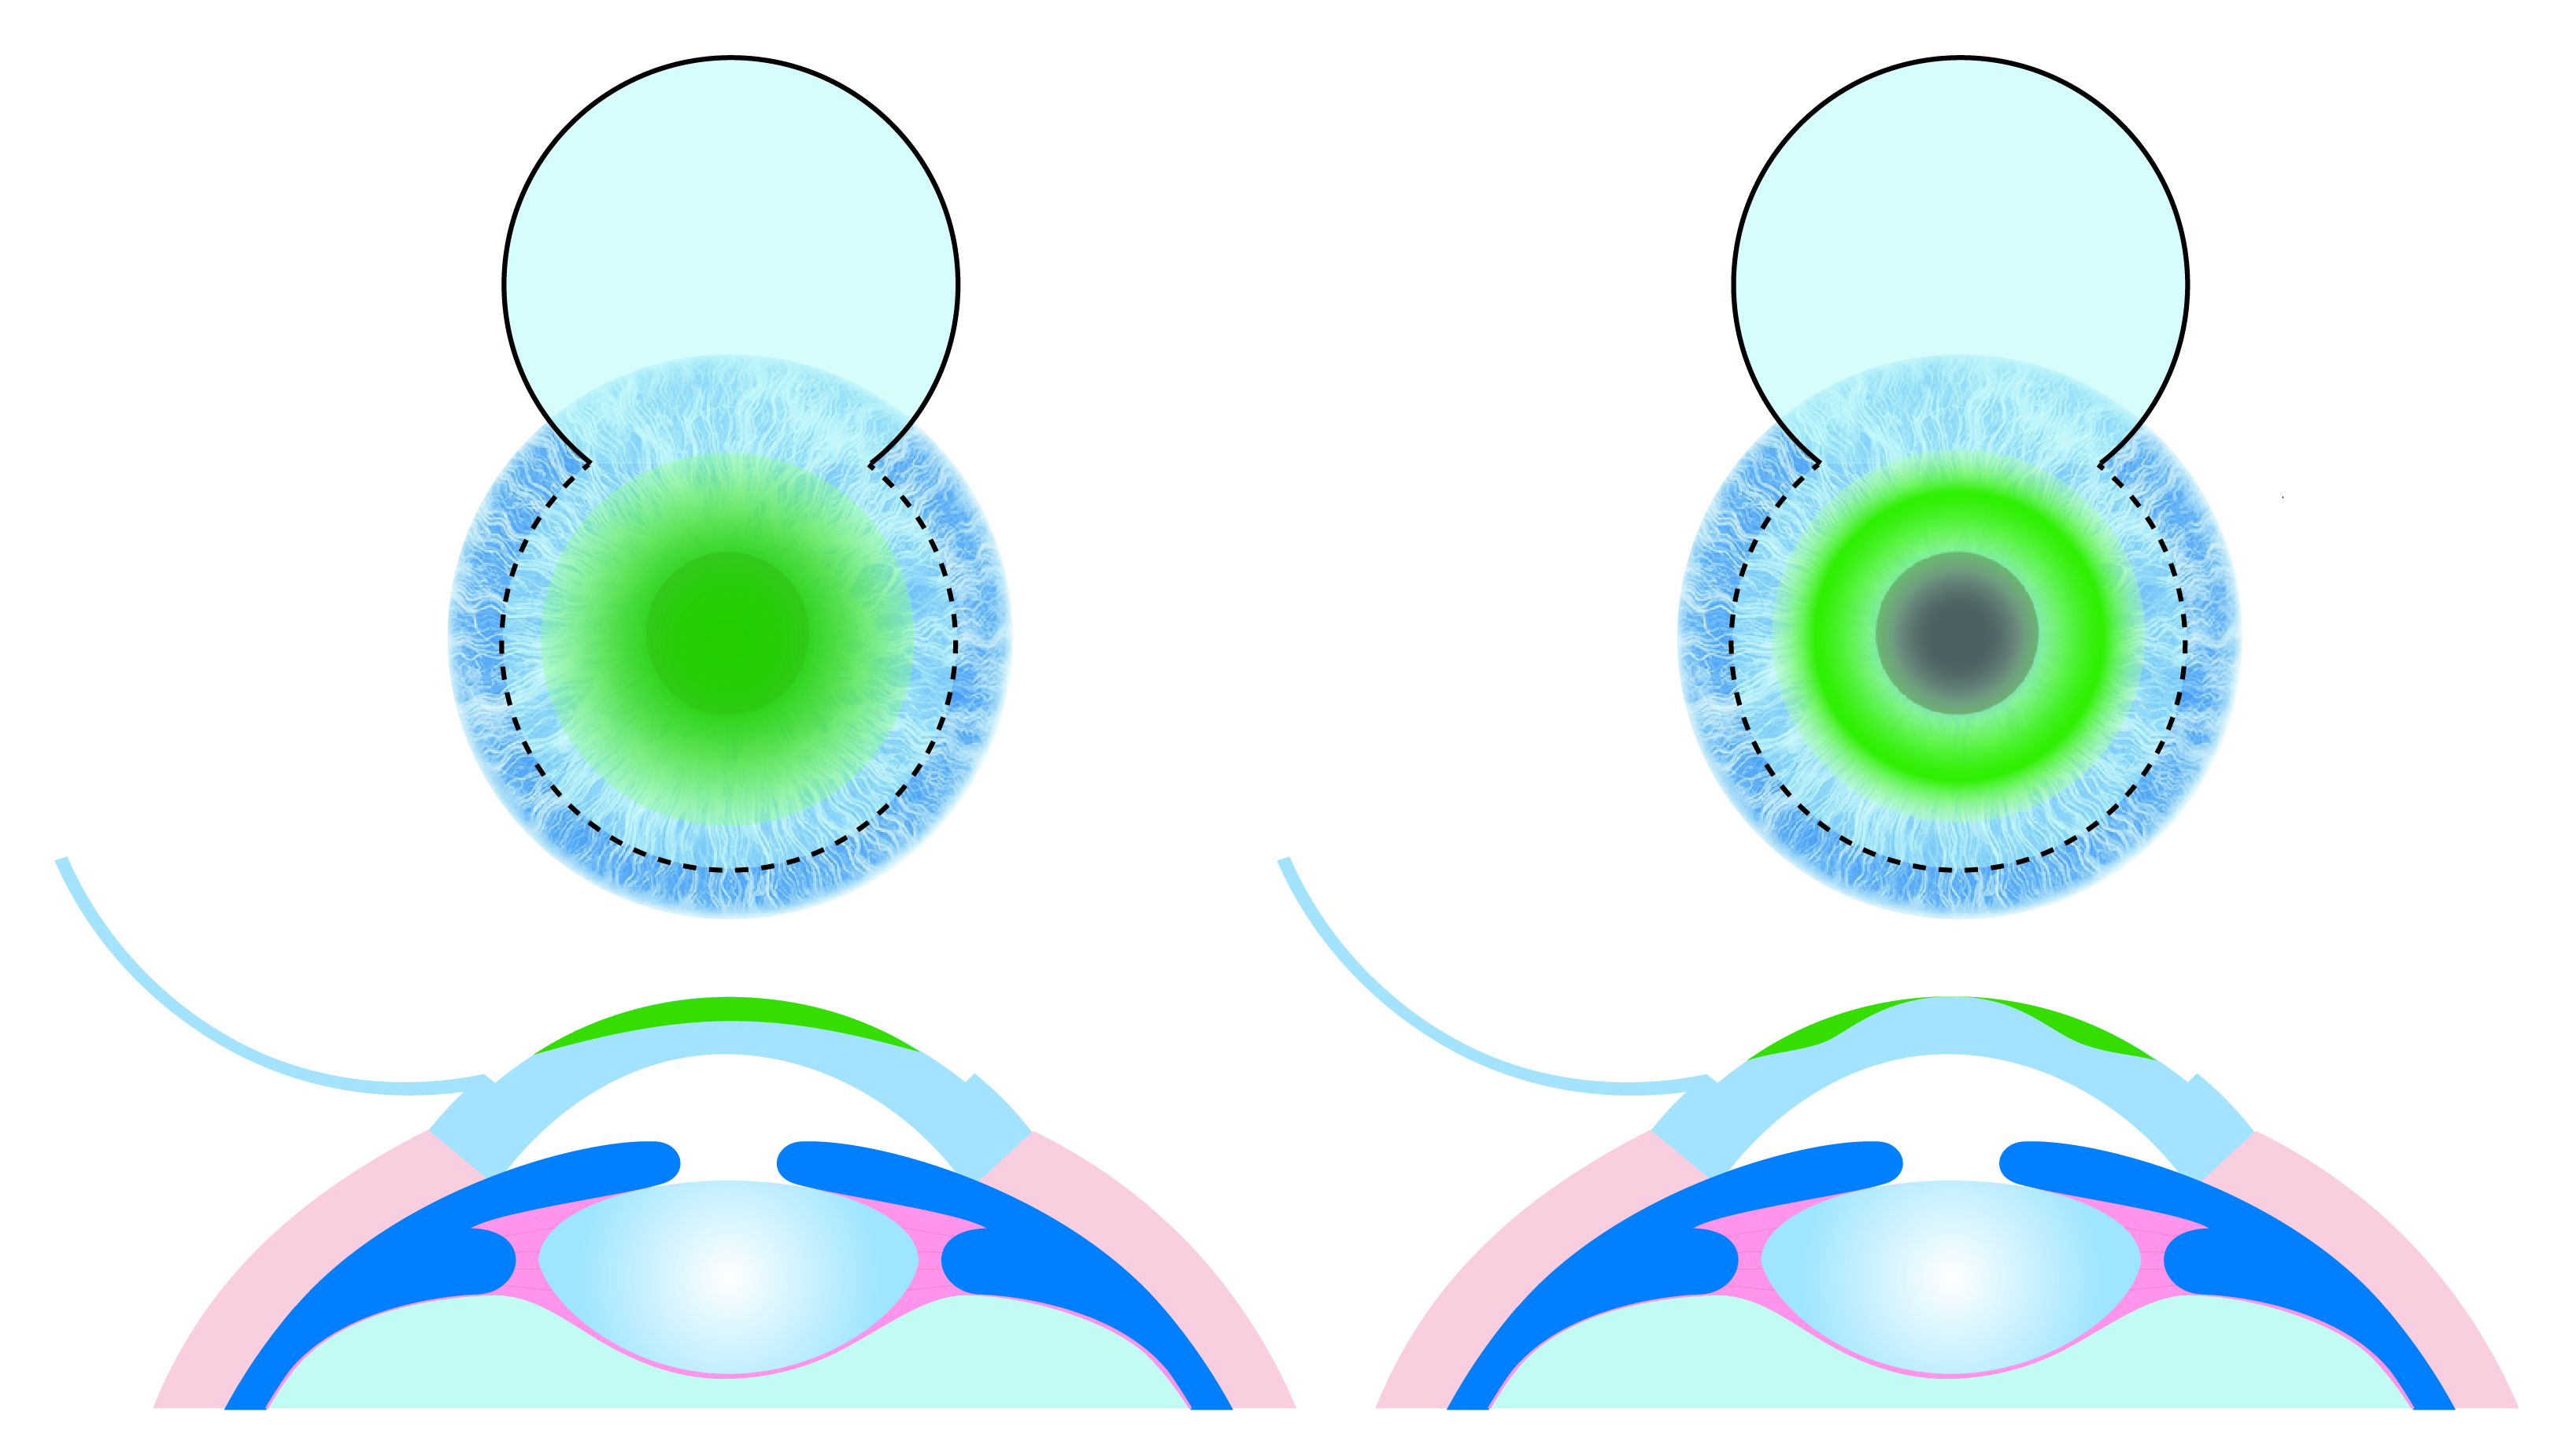 Figure 1. LASIK correction of myopia (left) flattens the central corneal surface, thus correcting the focal plane on the retina. LASIK correction of hyperopia (right) sculpts the cornea to make a steeper central area, thus correcting the focal plane on the retina.